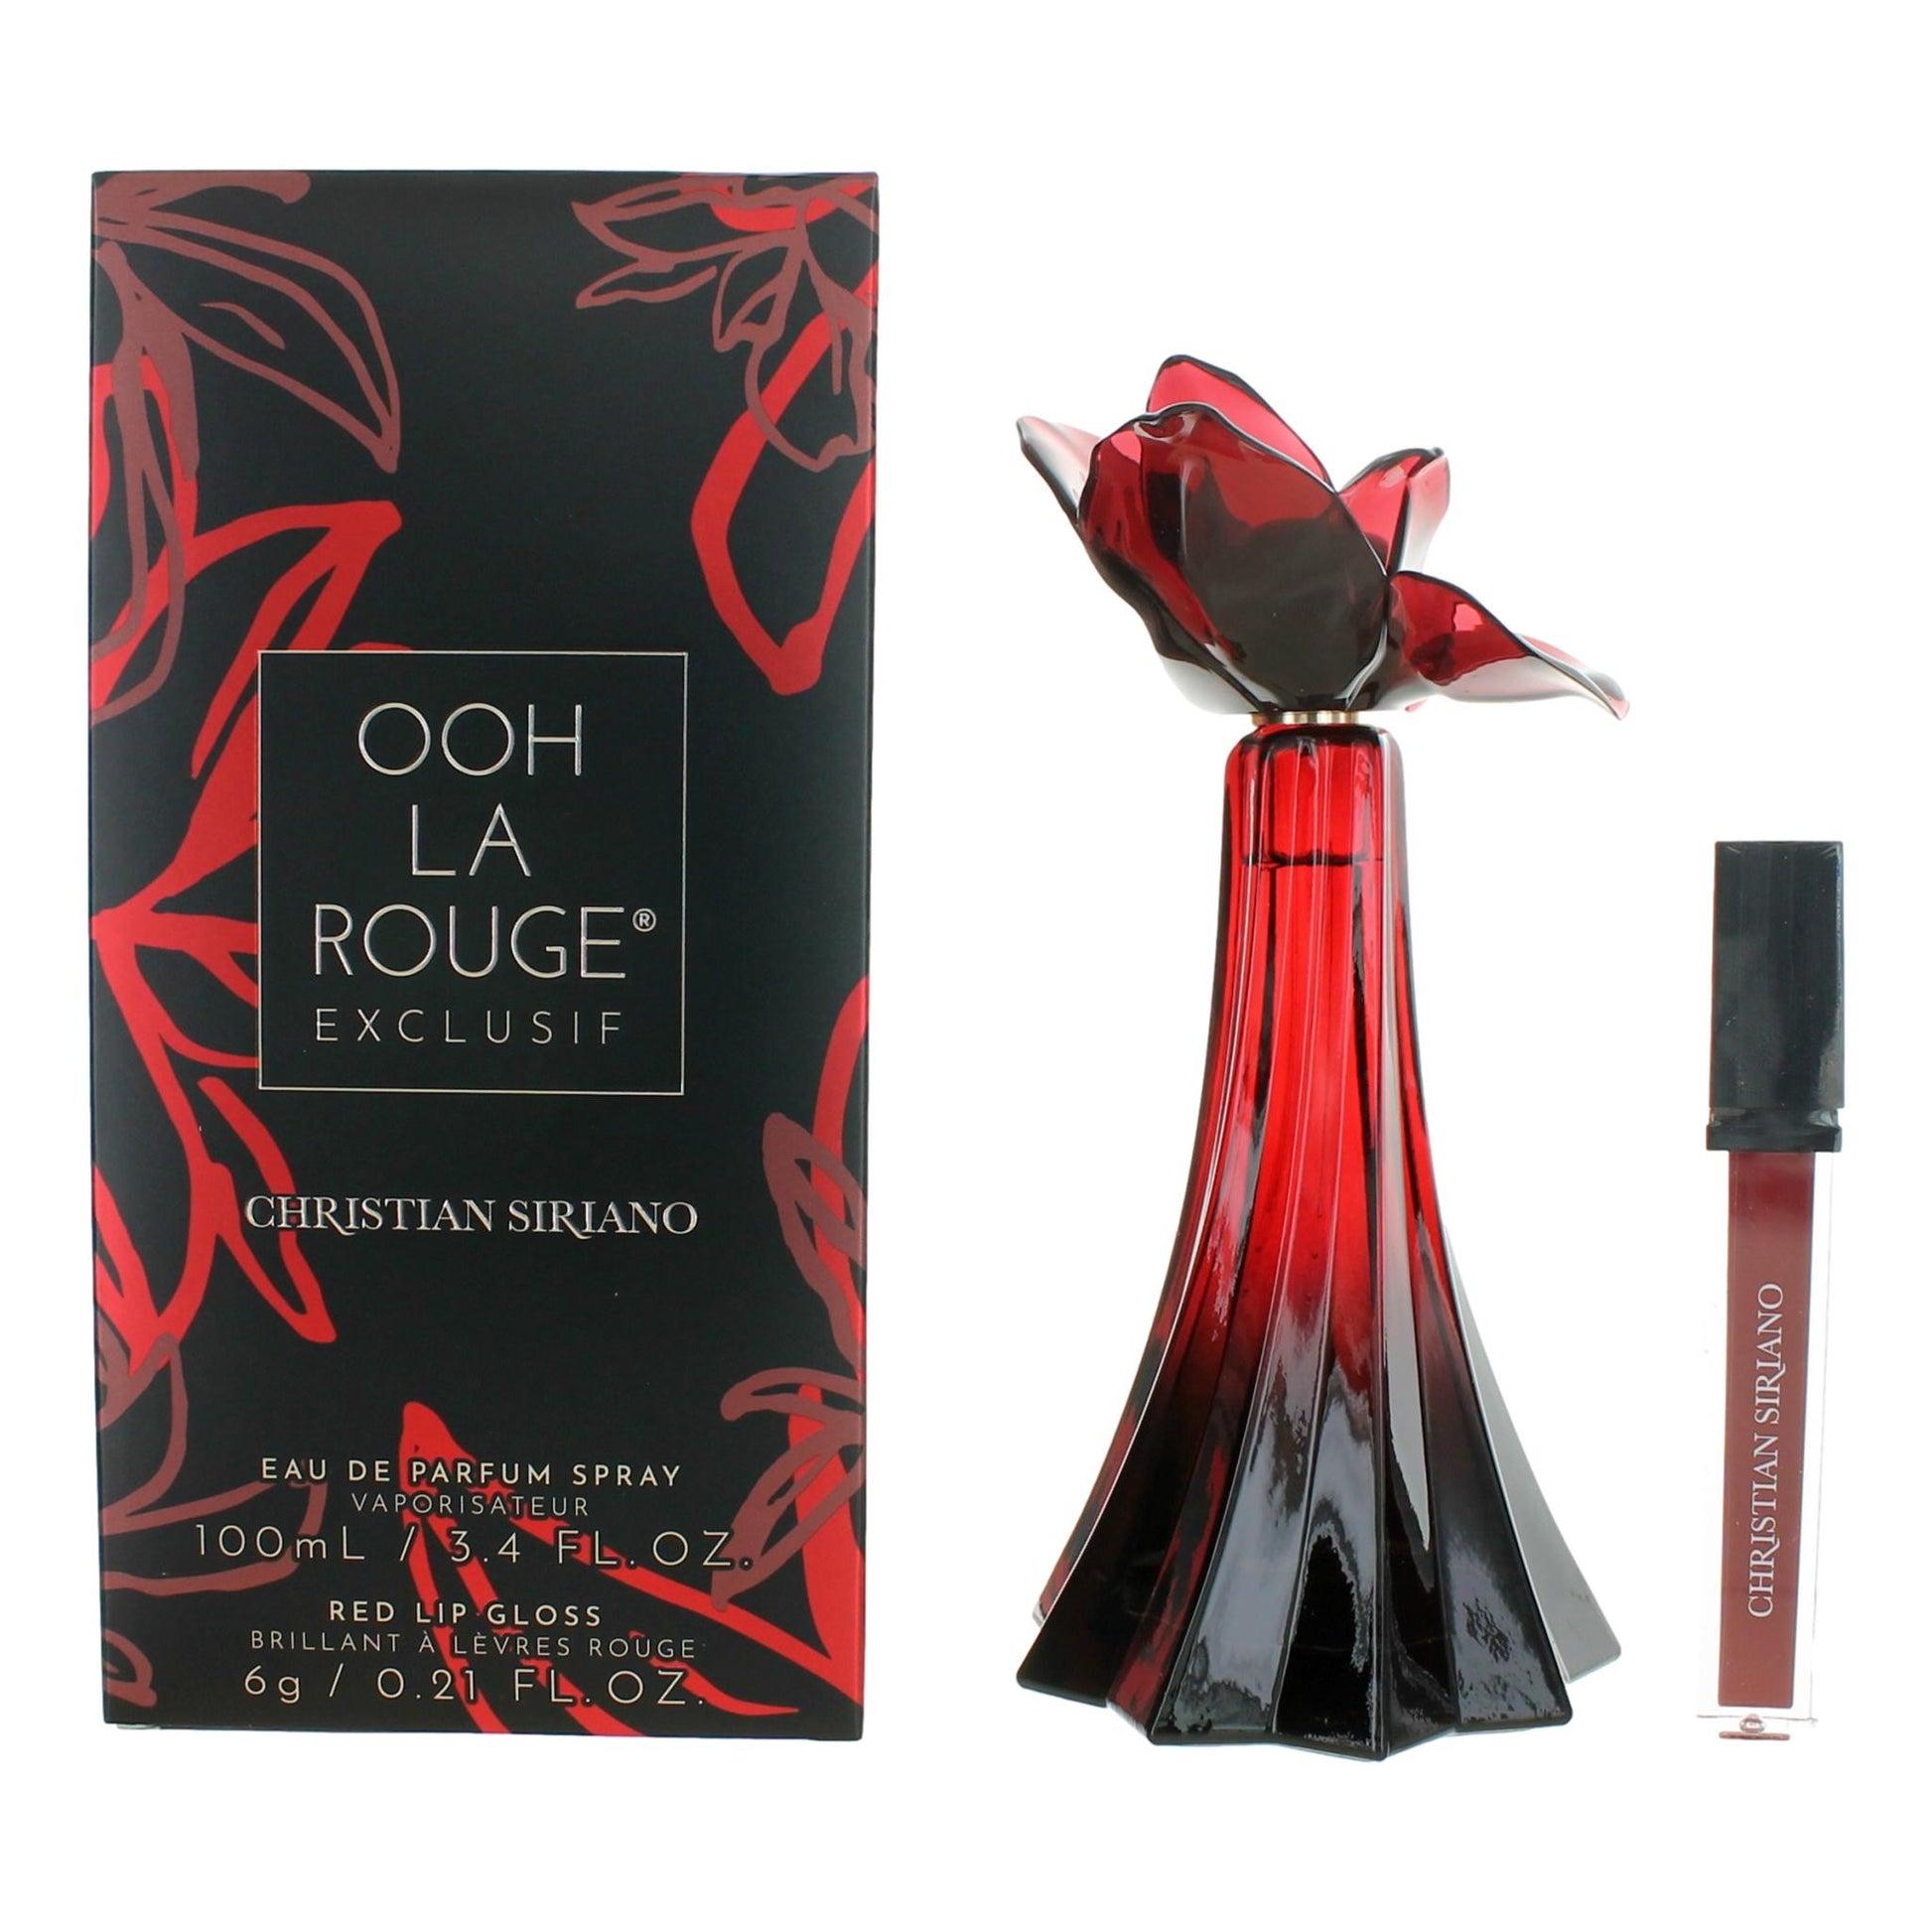 Bottle of Ooh La Rouge Exclusif by Christian Siriano, 3.4 oz Eau De Parfum Spray for Women with Lip Gloss